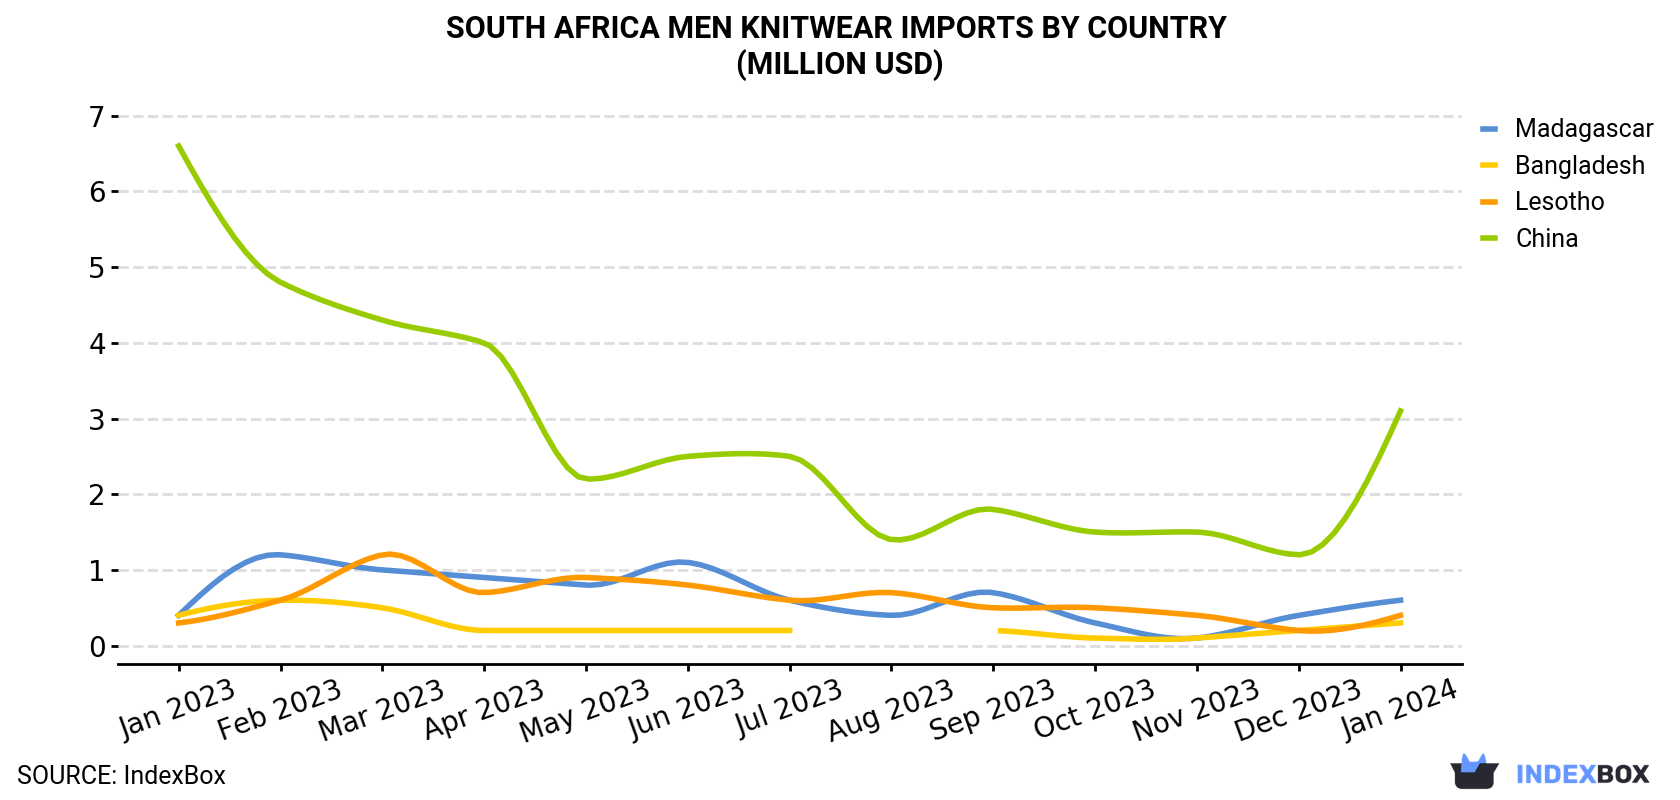 South Africa Men Knitwear Imports By Country (Million USD)